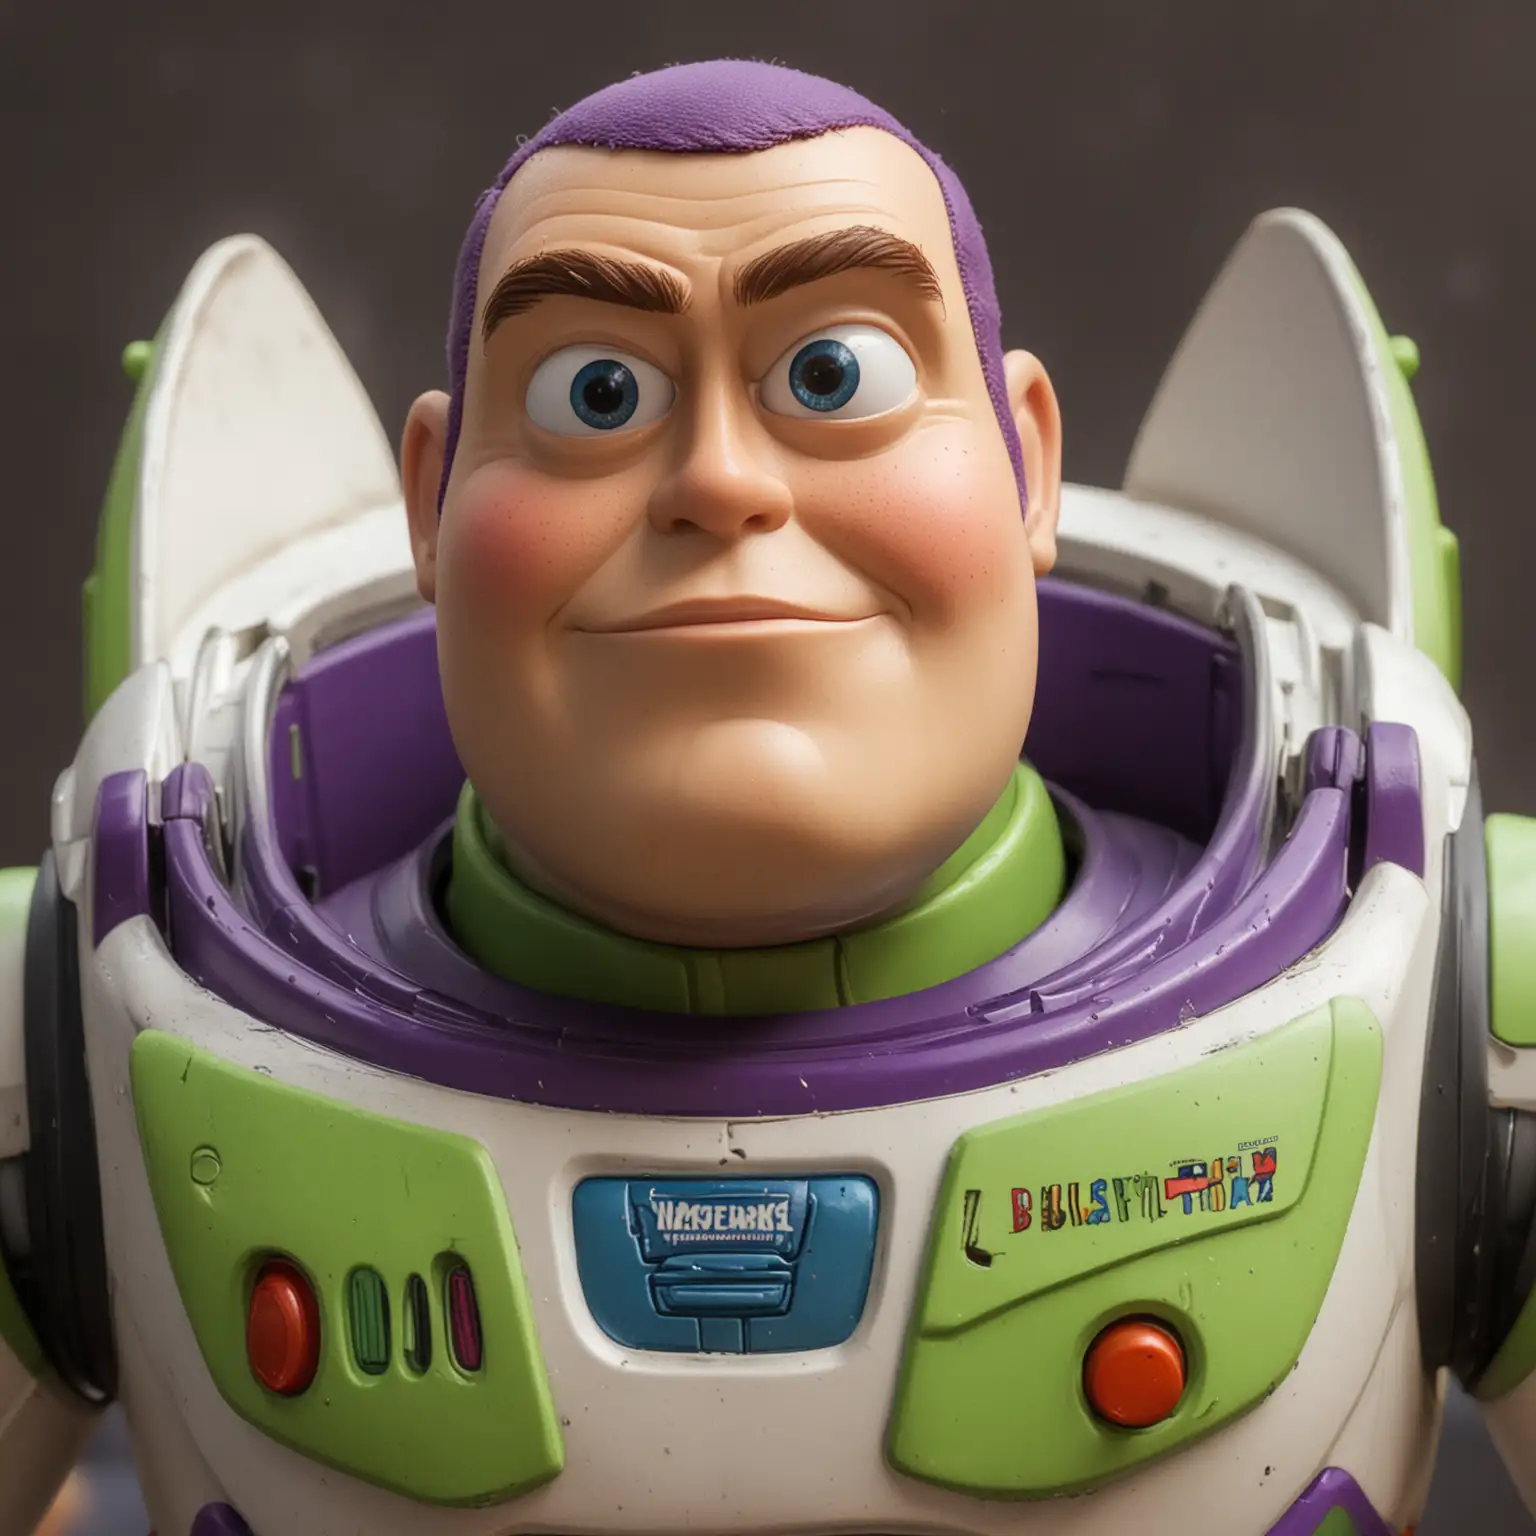 CloseUp of Buzz Lightyear Toy Character